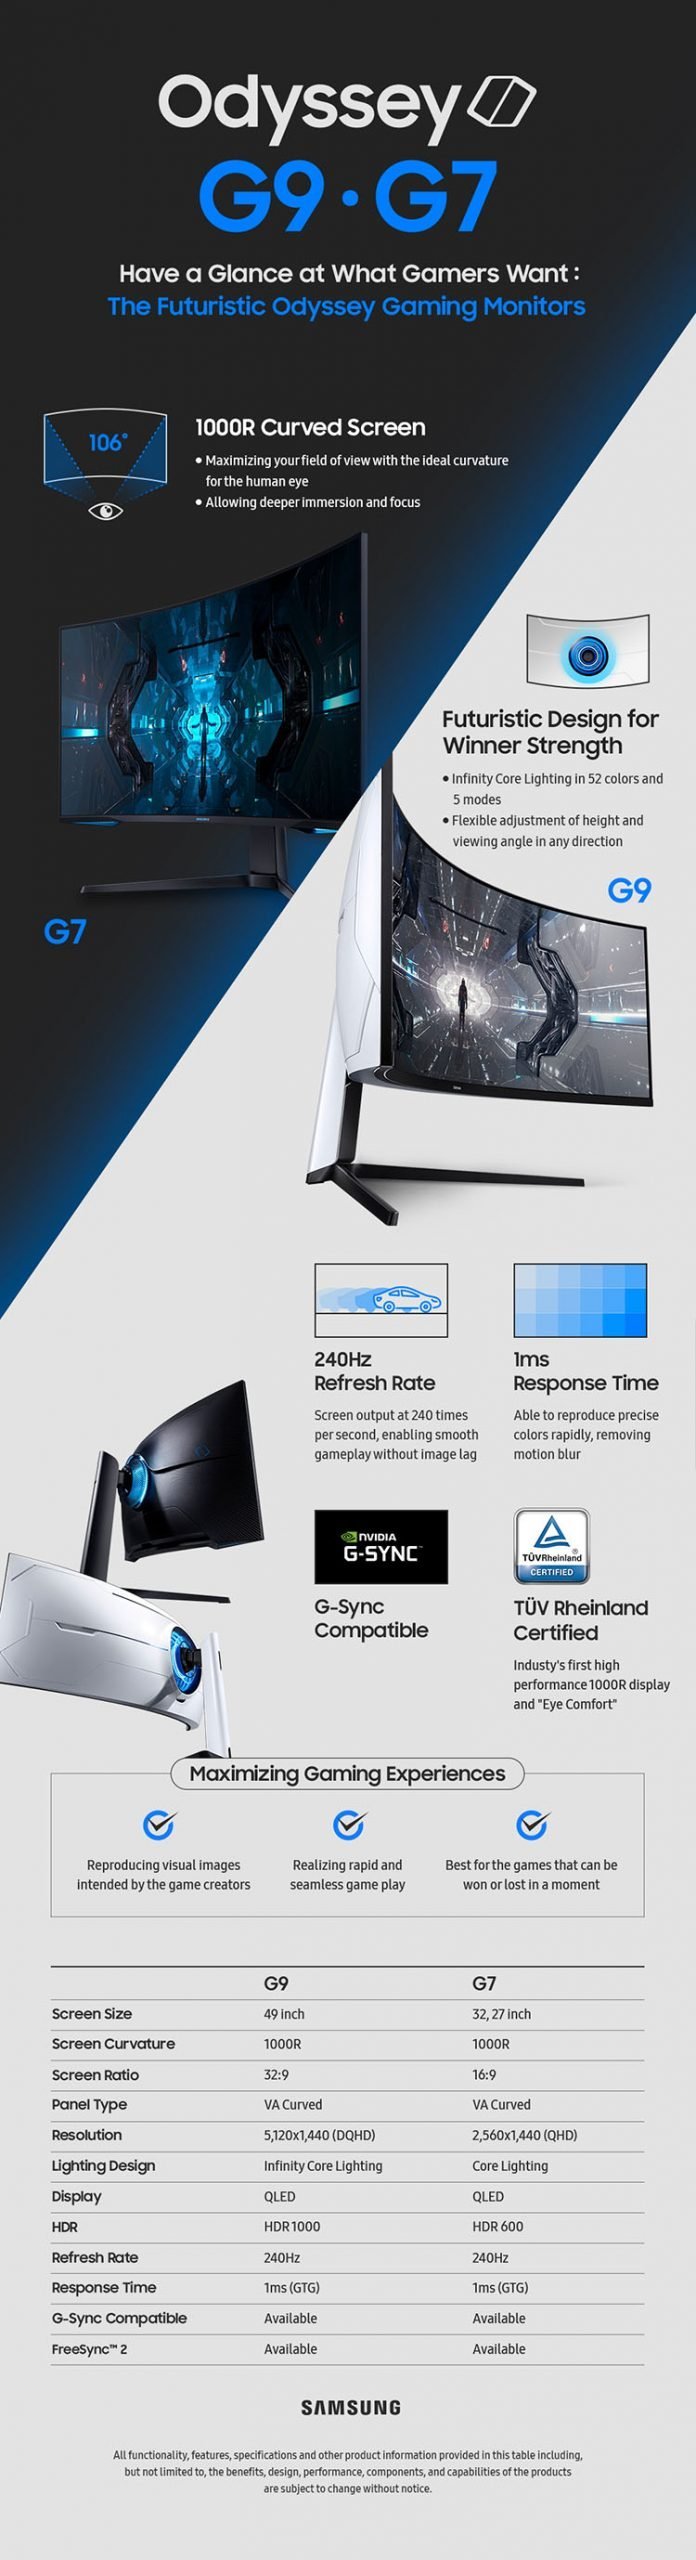 Samsung Odyssey Gaming Monitor Infographic